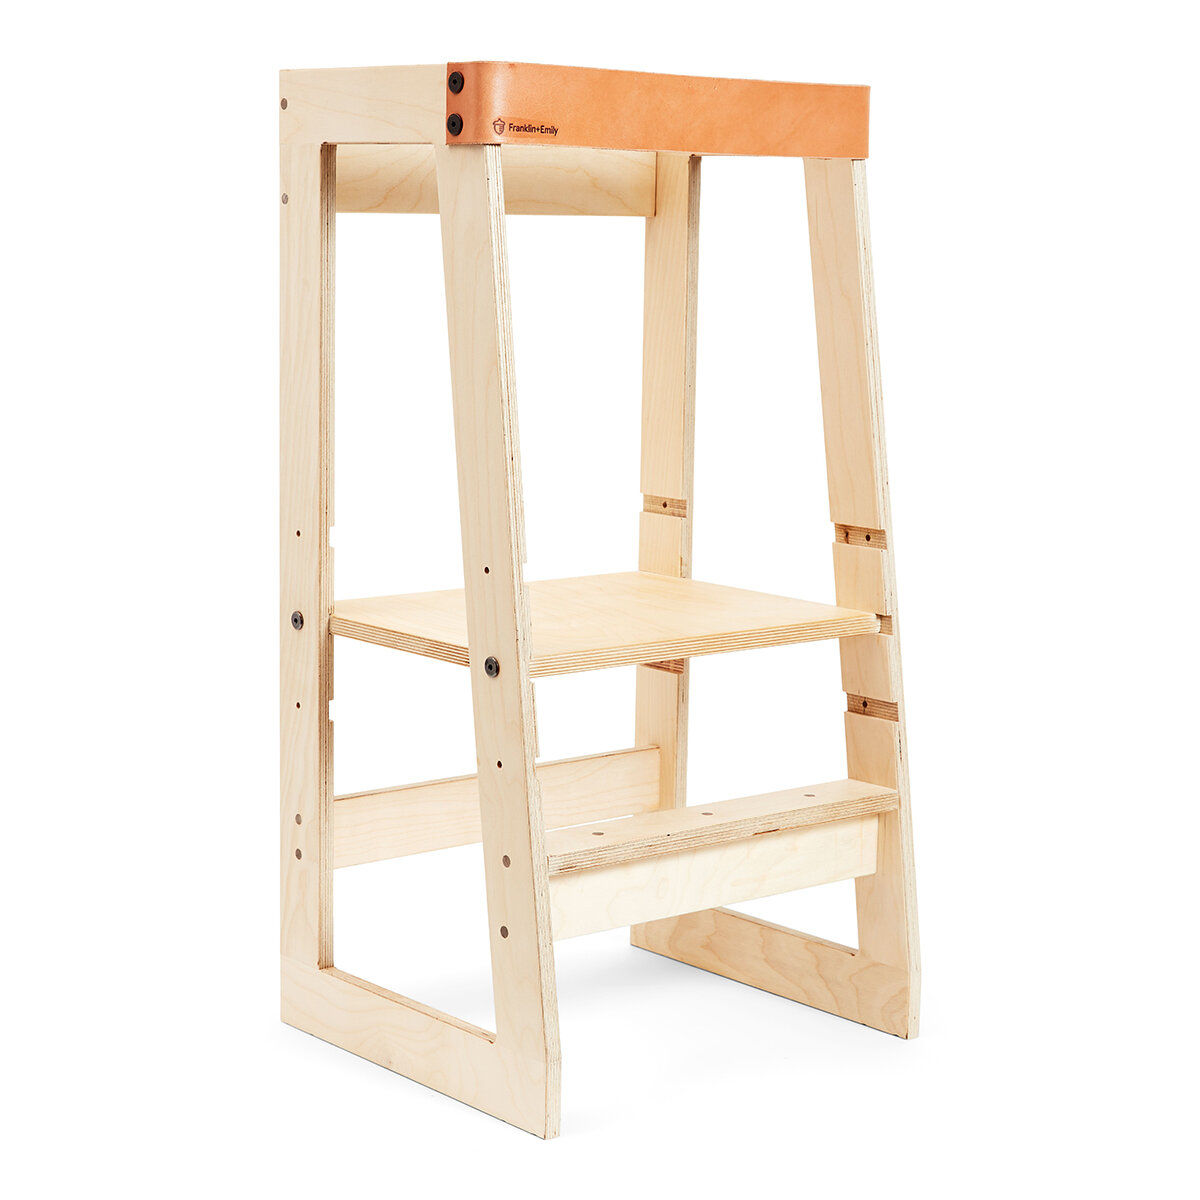 $185 | Learning Tower